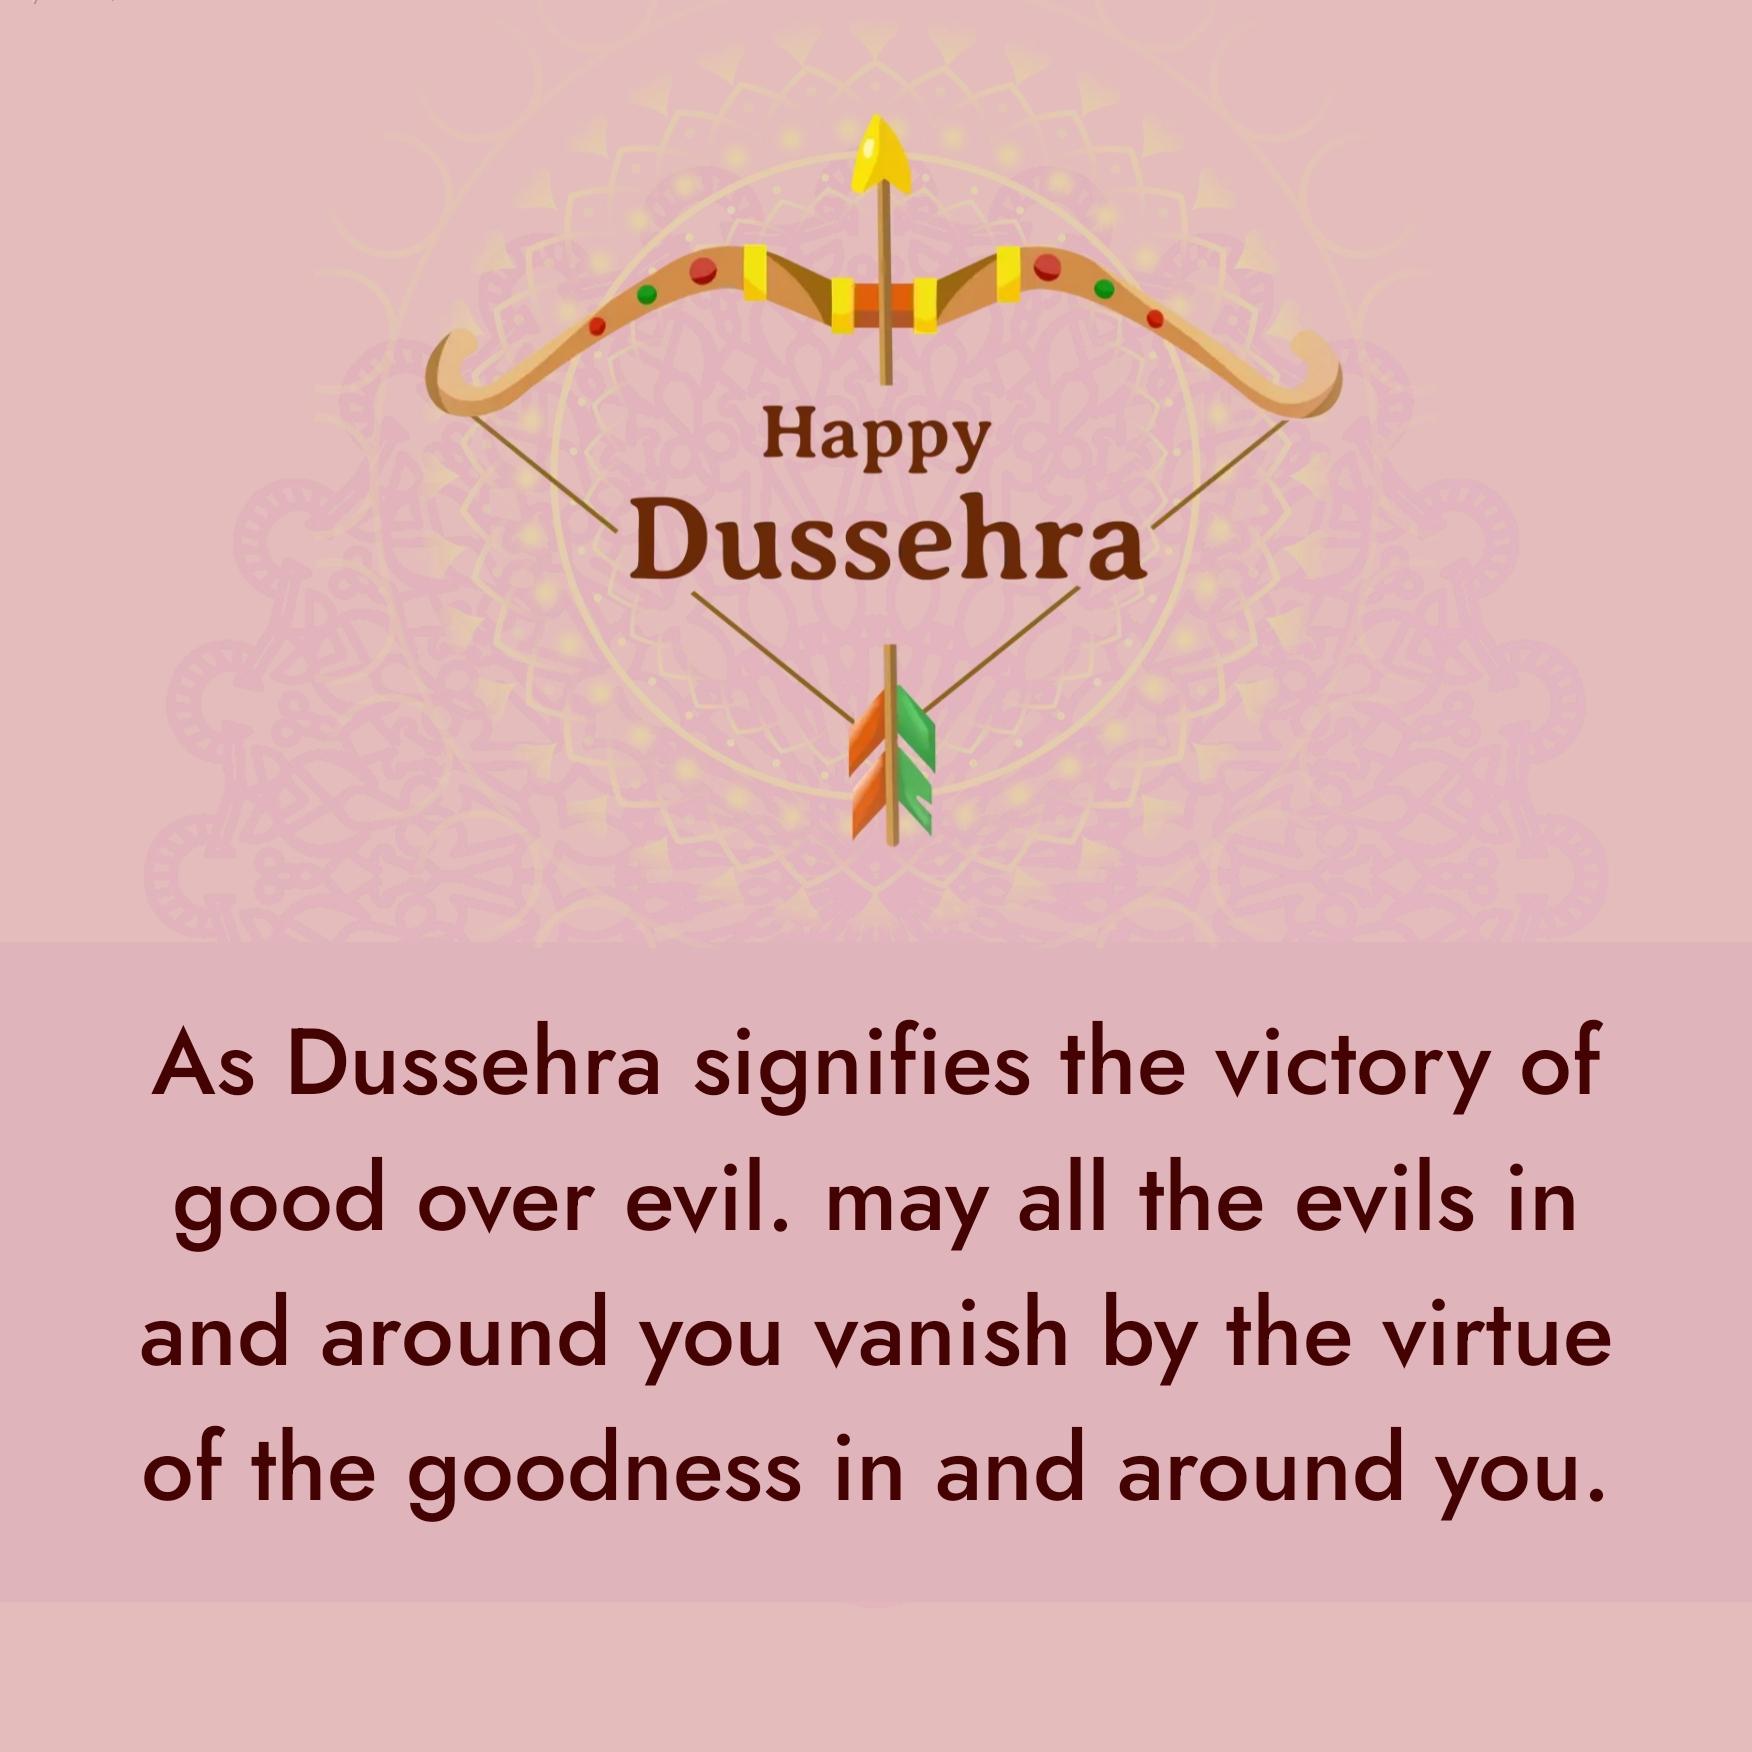 As Dussehra signifies the victory of good over evil